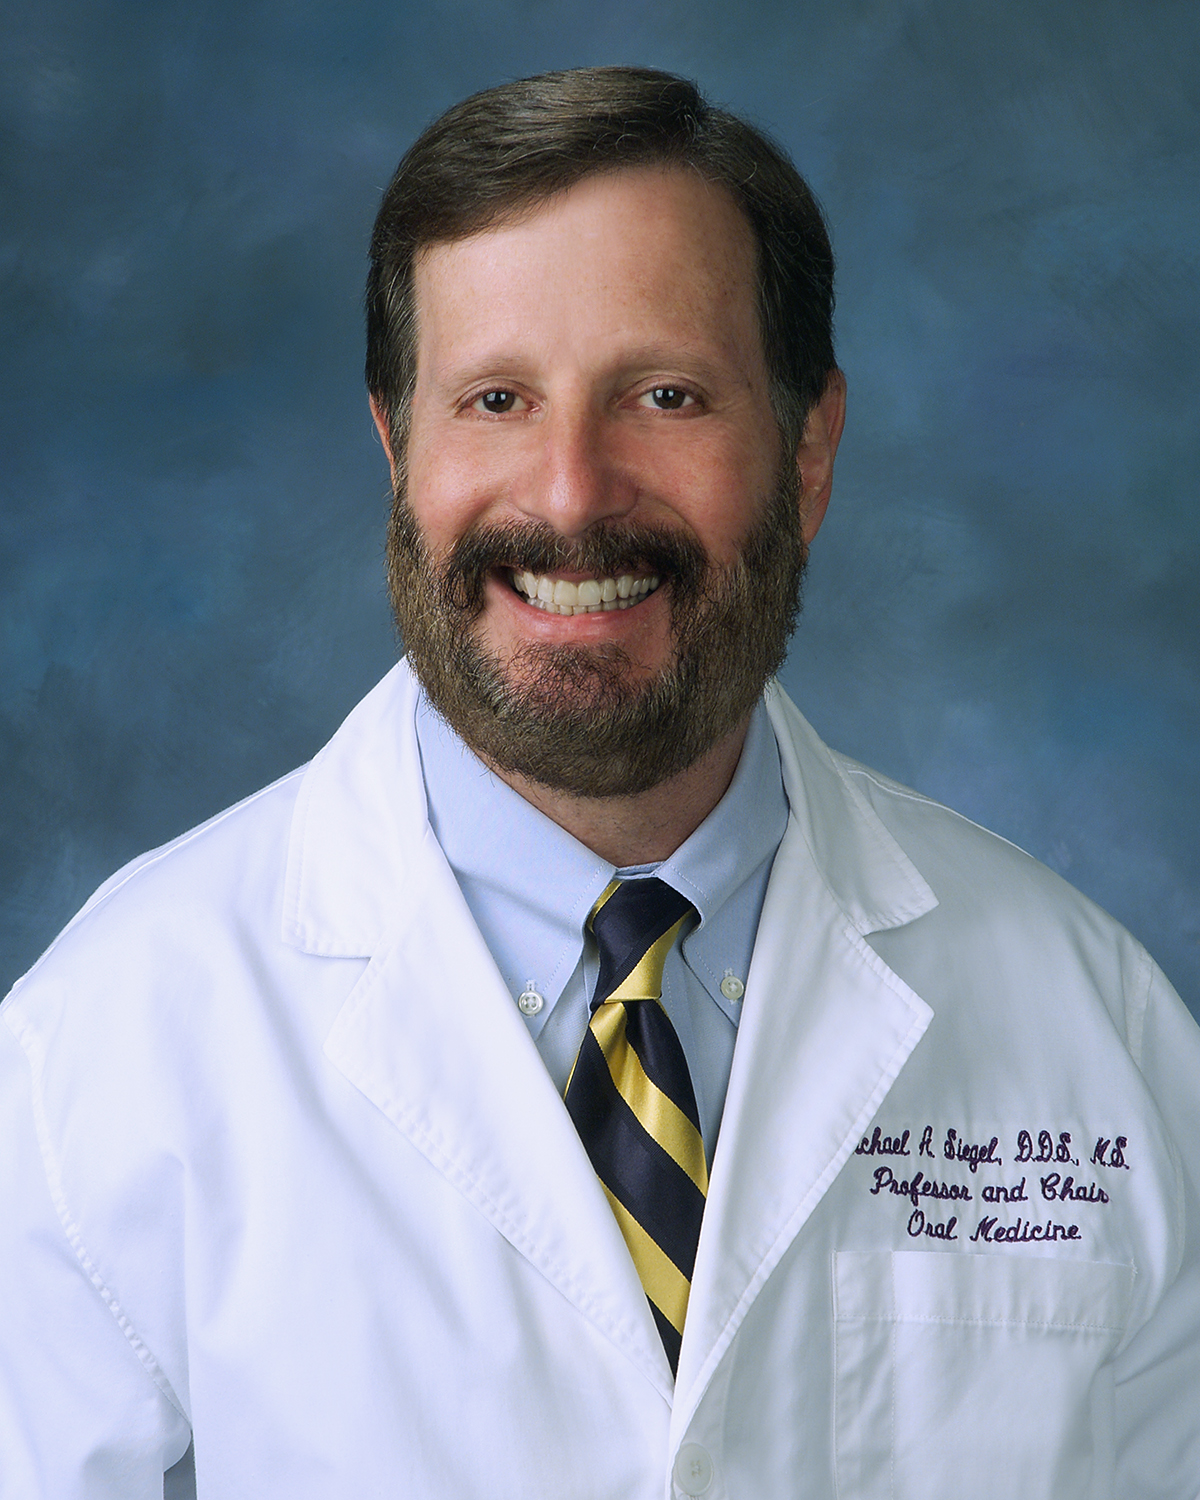 Michael A. Siegel, DDS, MS, FDS RCSEd